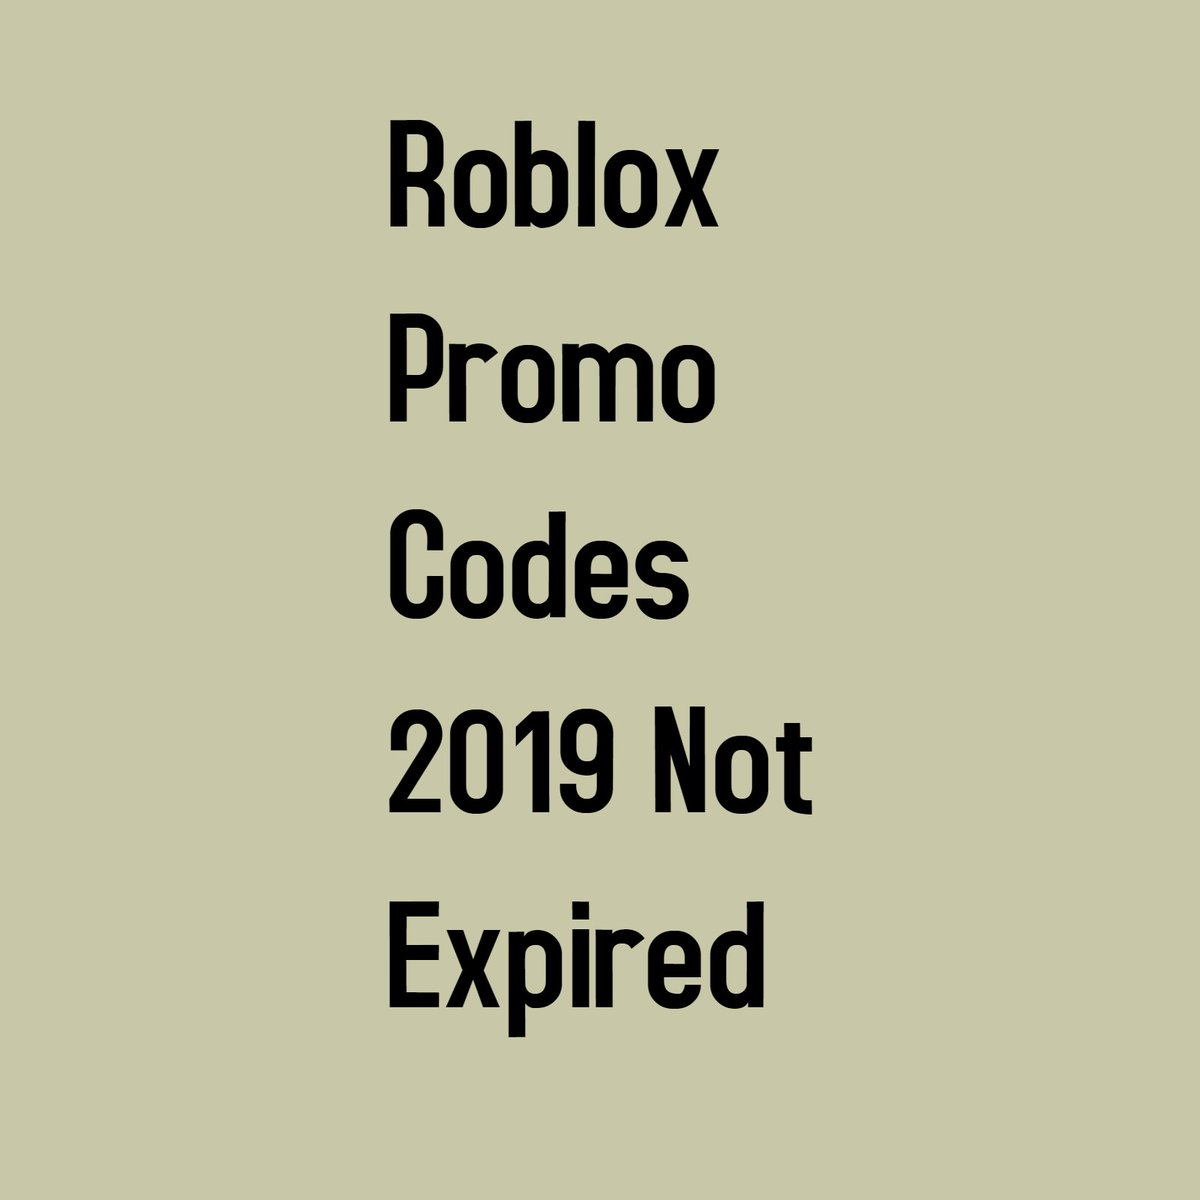 Robloxpromocodes2019notexpired Hashtag On Twitter - 100 free robux promo codes 2018 august